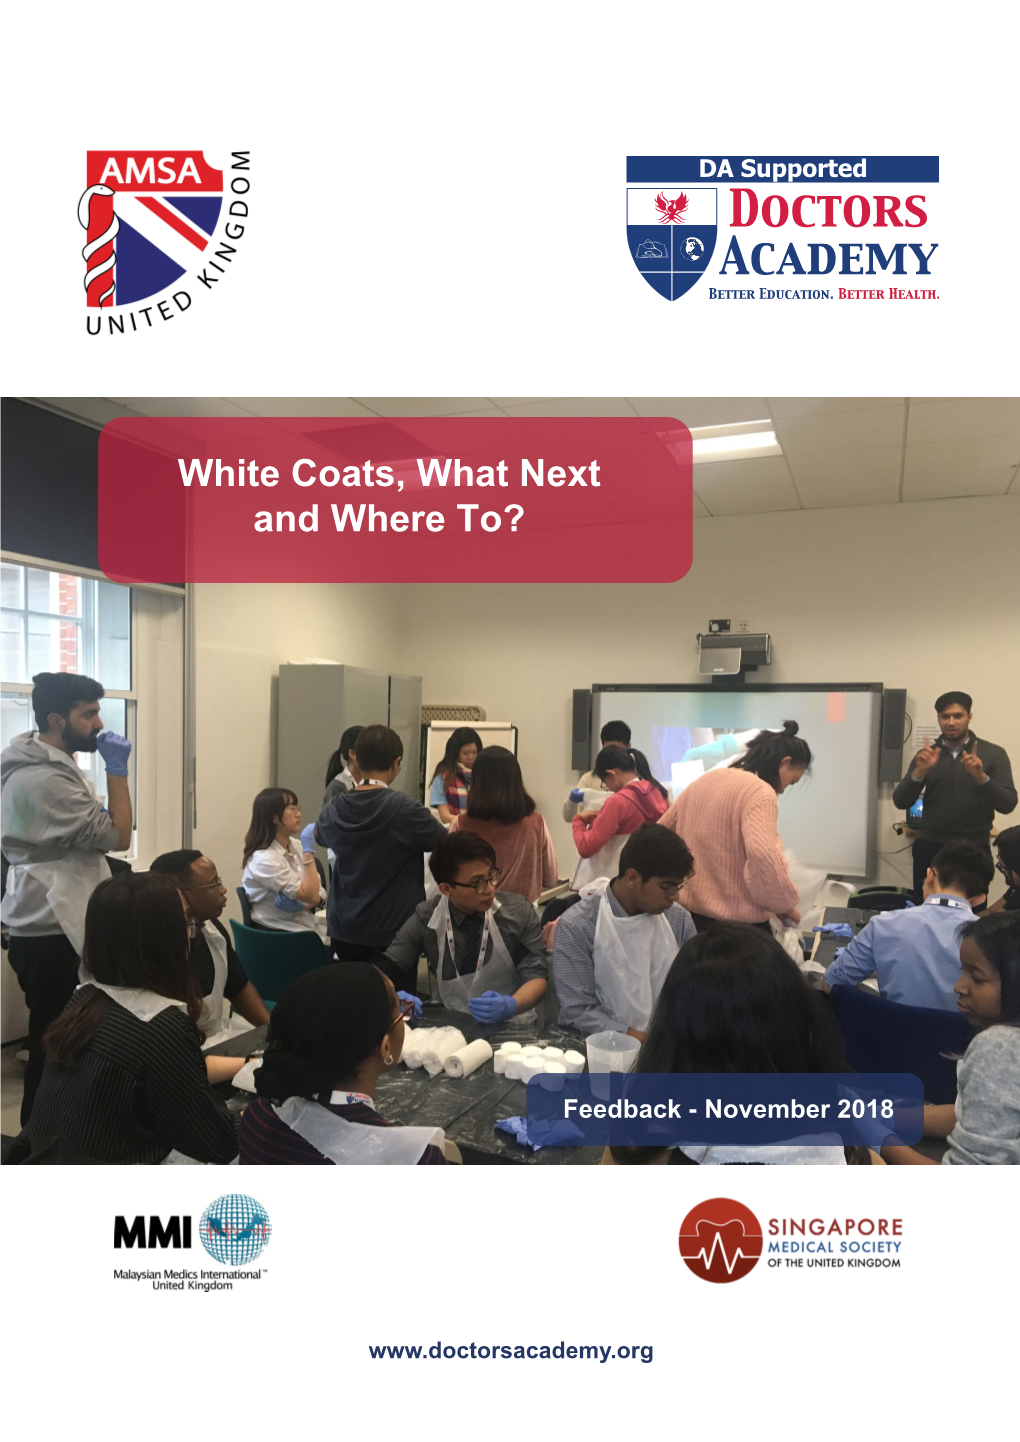 White Coats, What Next and Where To?